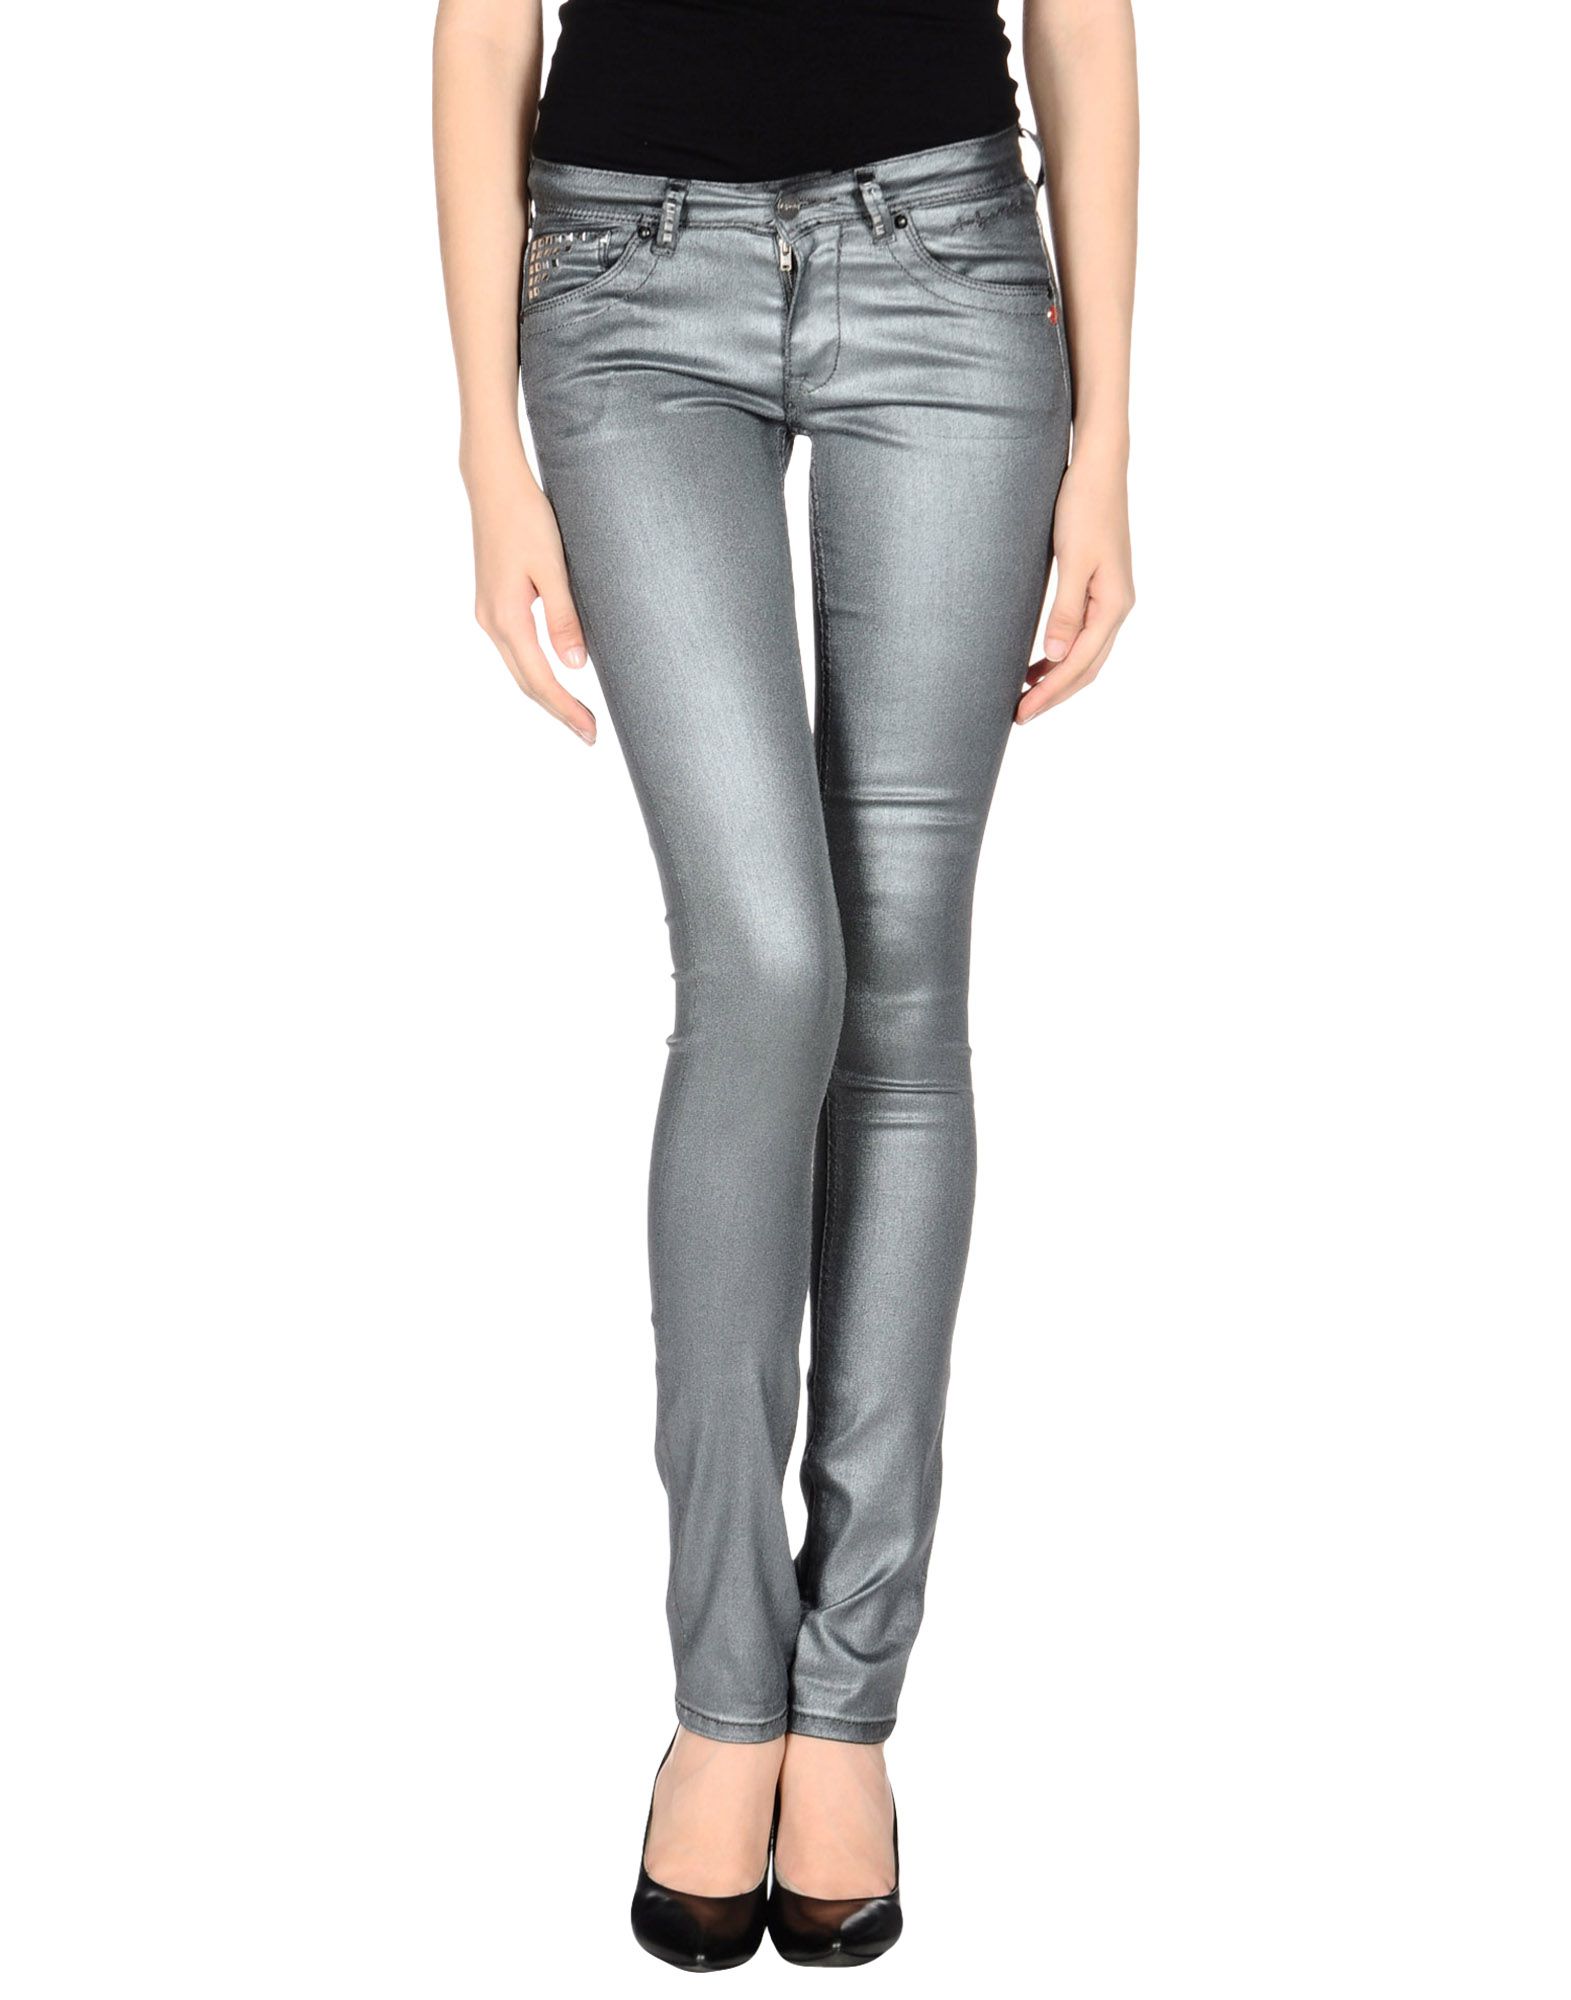 Foto andy warhol by pepe jeans pantalones vaqueros Mujer Gris